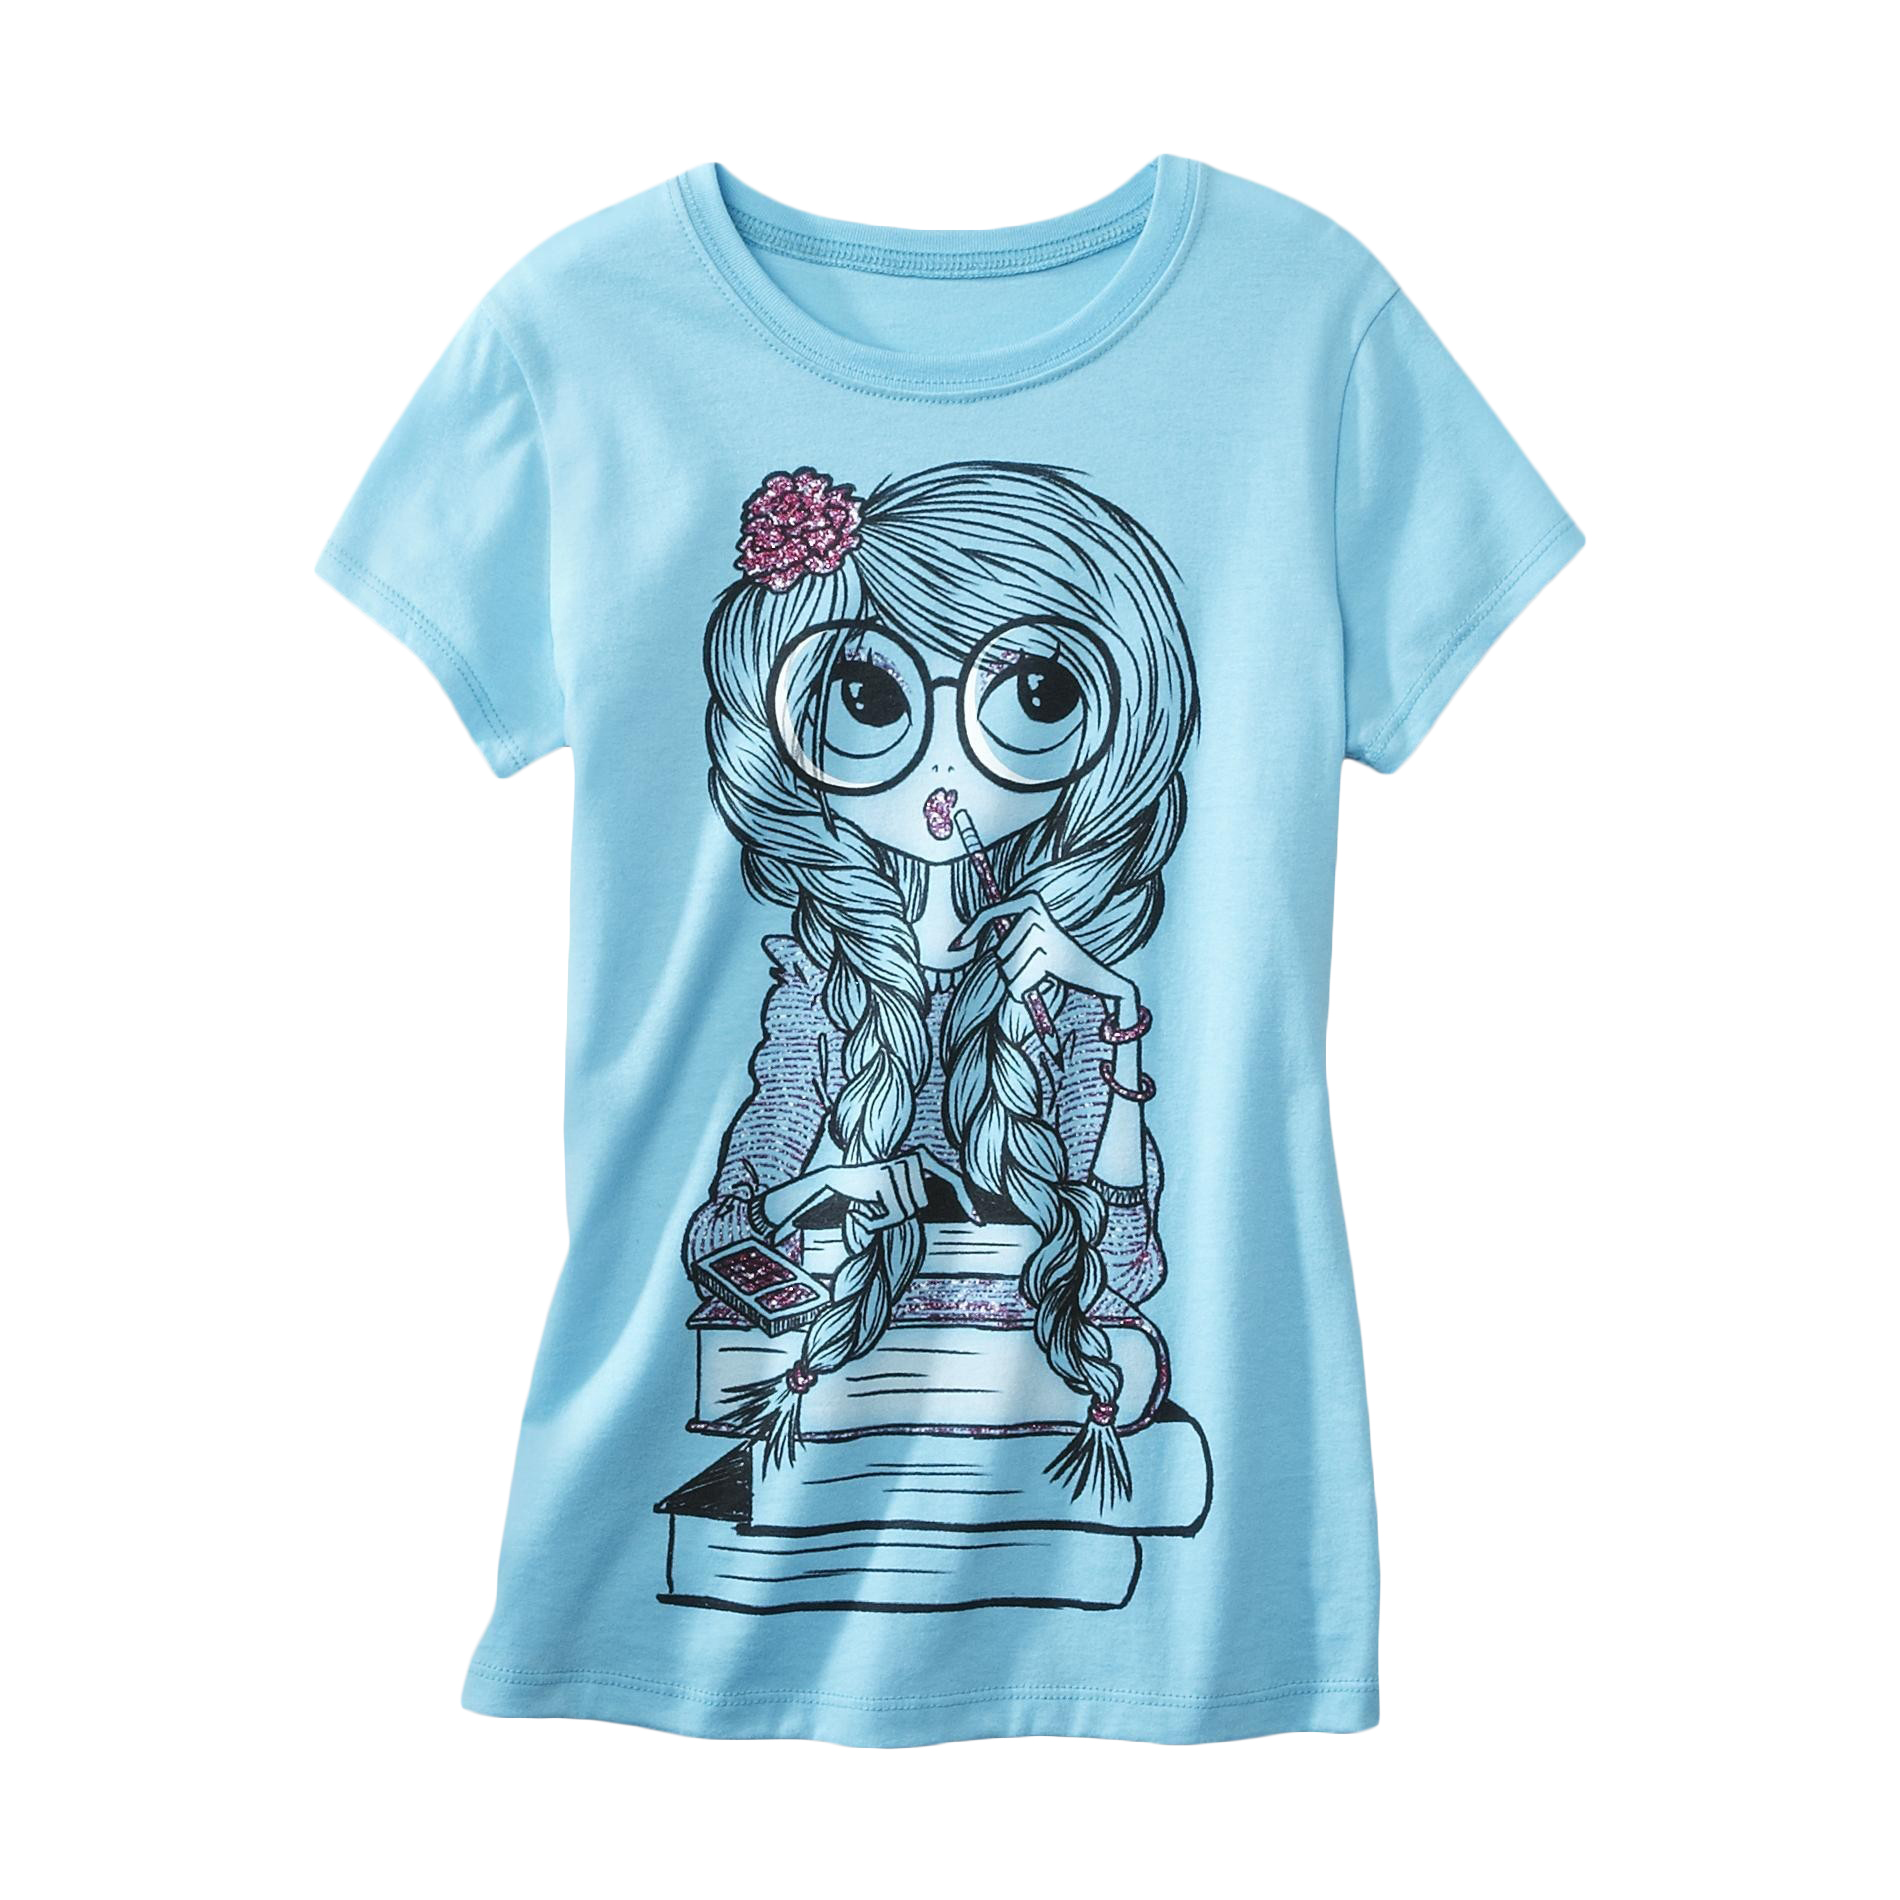 Jerry Leigh Girl's Graphic T-Shirt - Smart Girl